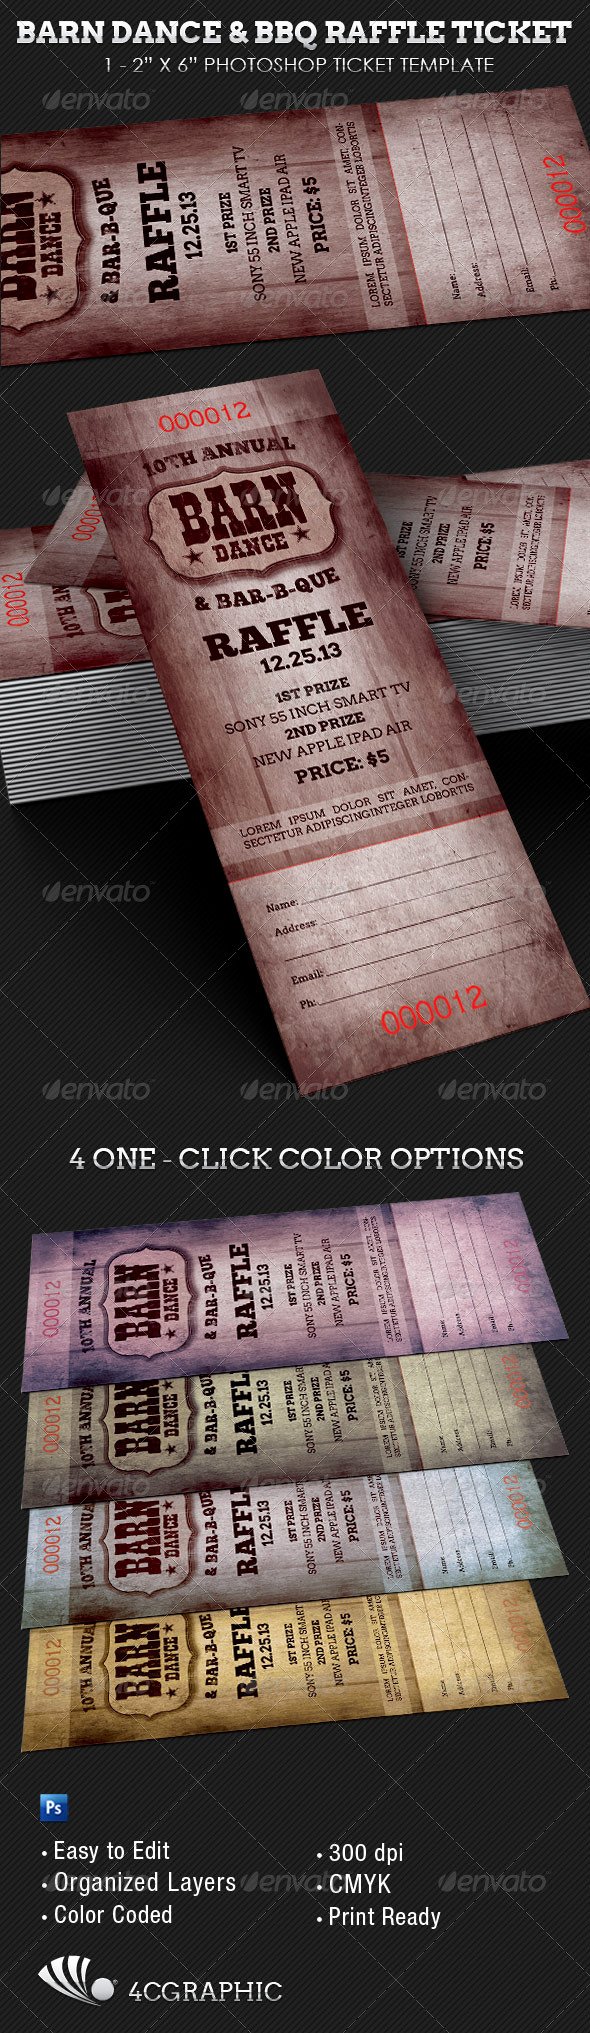 Event Ticket Template Photoshop Fresh Barn Dance Bbq Raffle Ticket Template by 4cgraphic